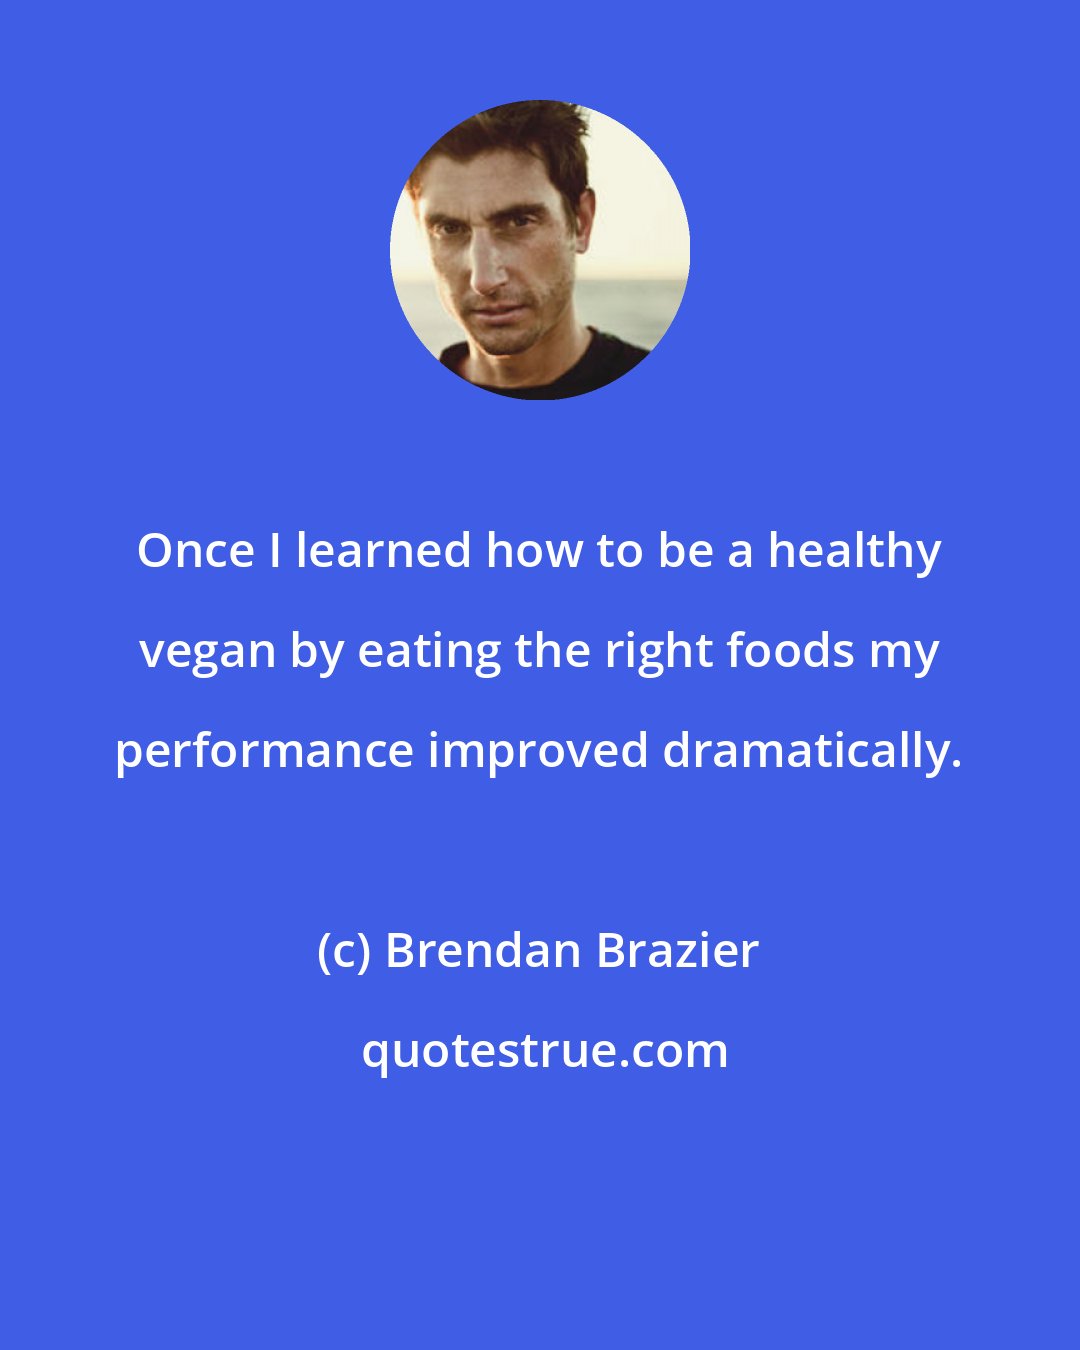 Brendan Brazier: Once I learned how to be a healthy vegan by eating the right foods my performance improved dramatically.